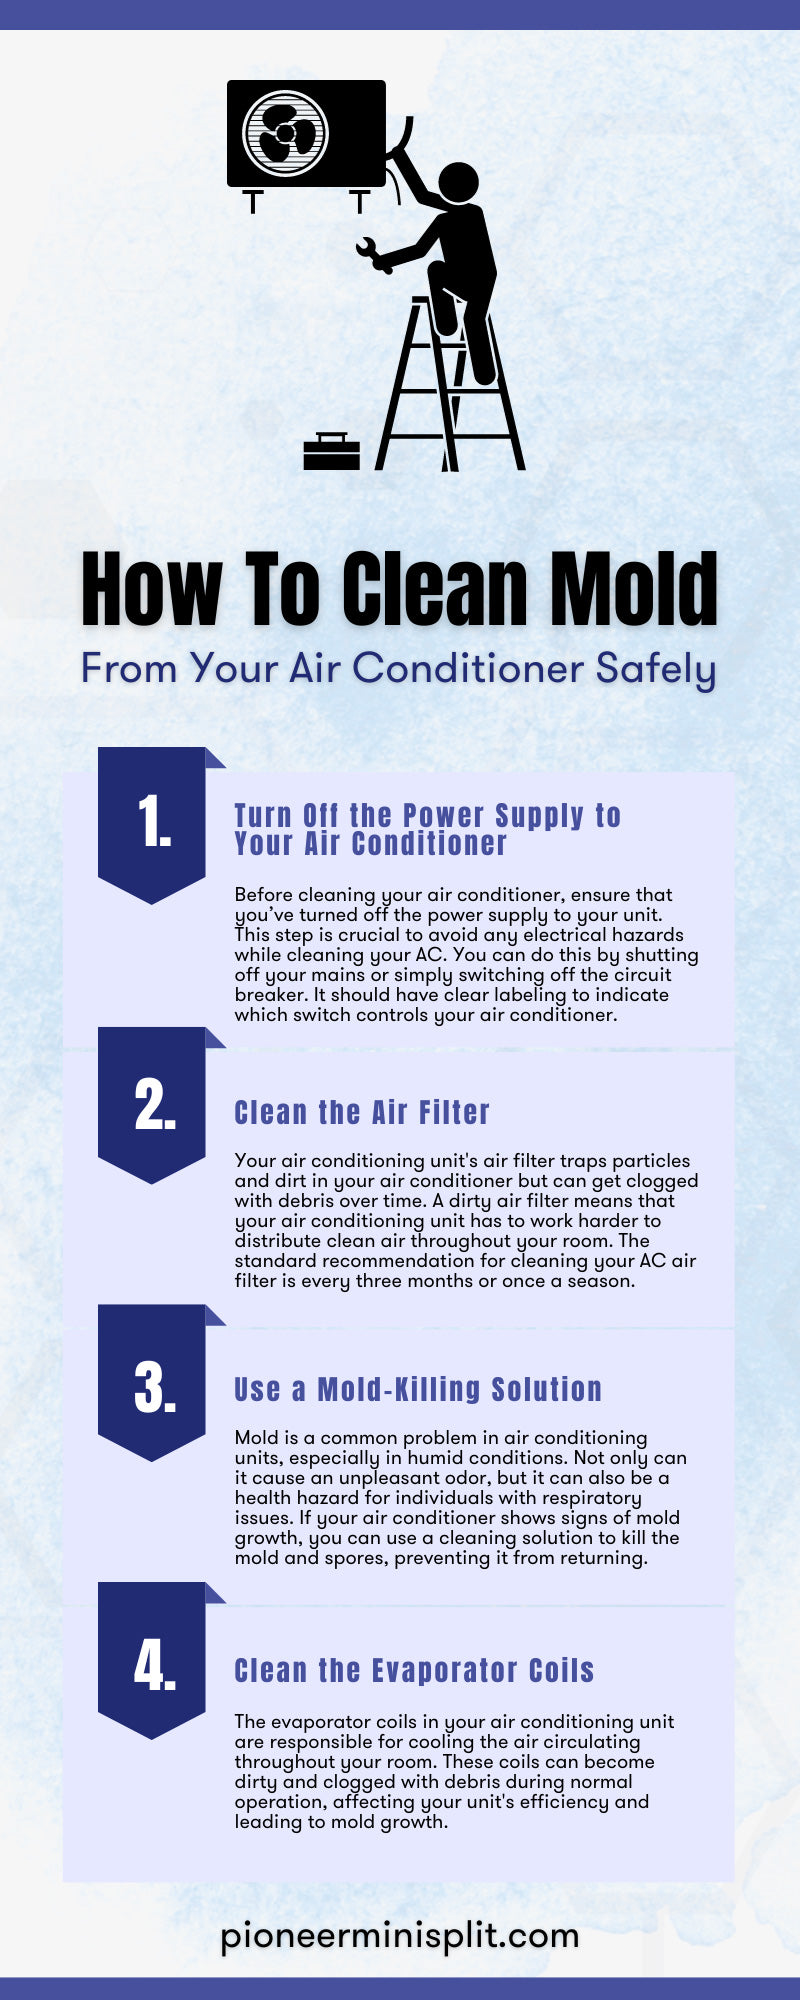 How To Clean Mold From Your Air Conditioner Safely